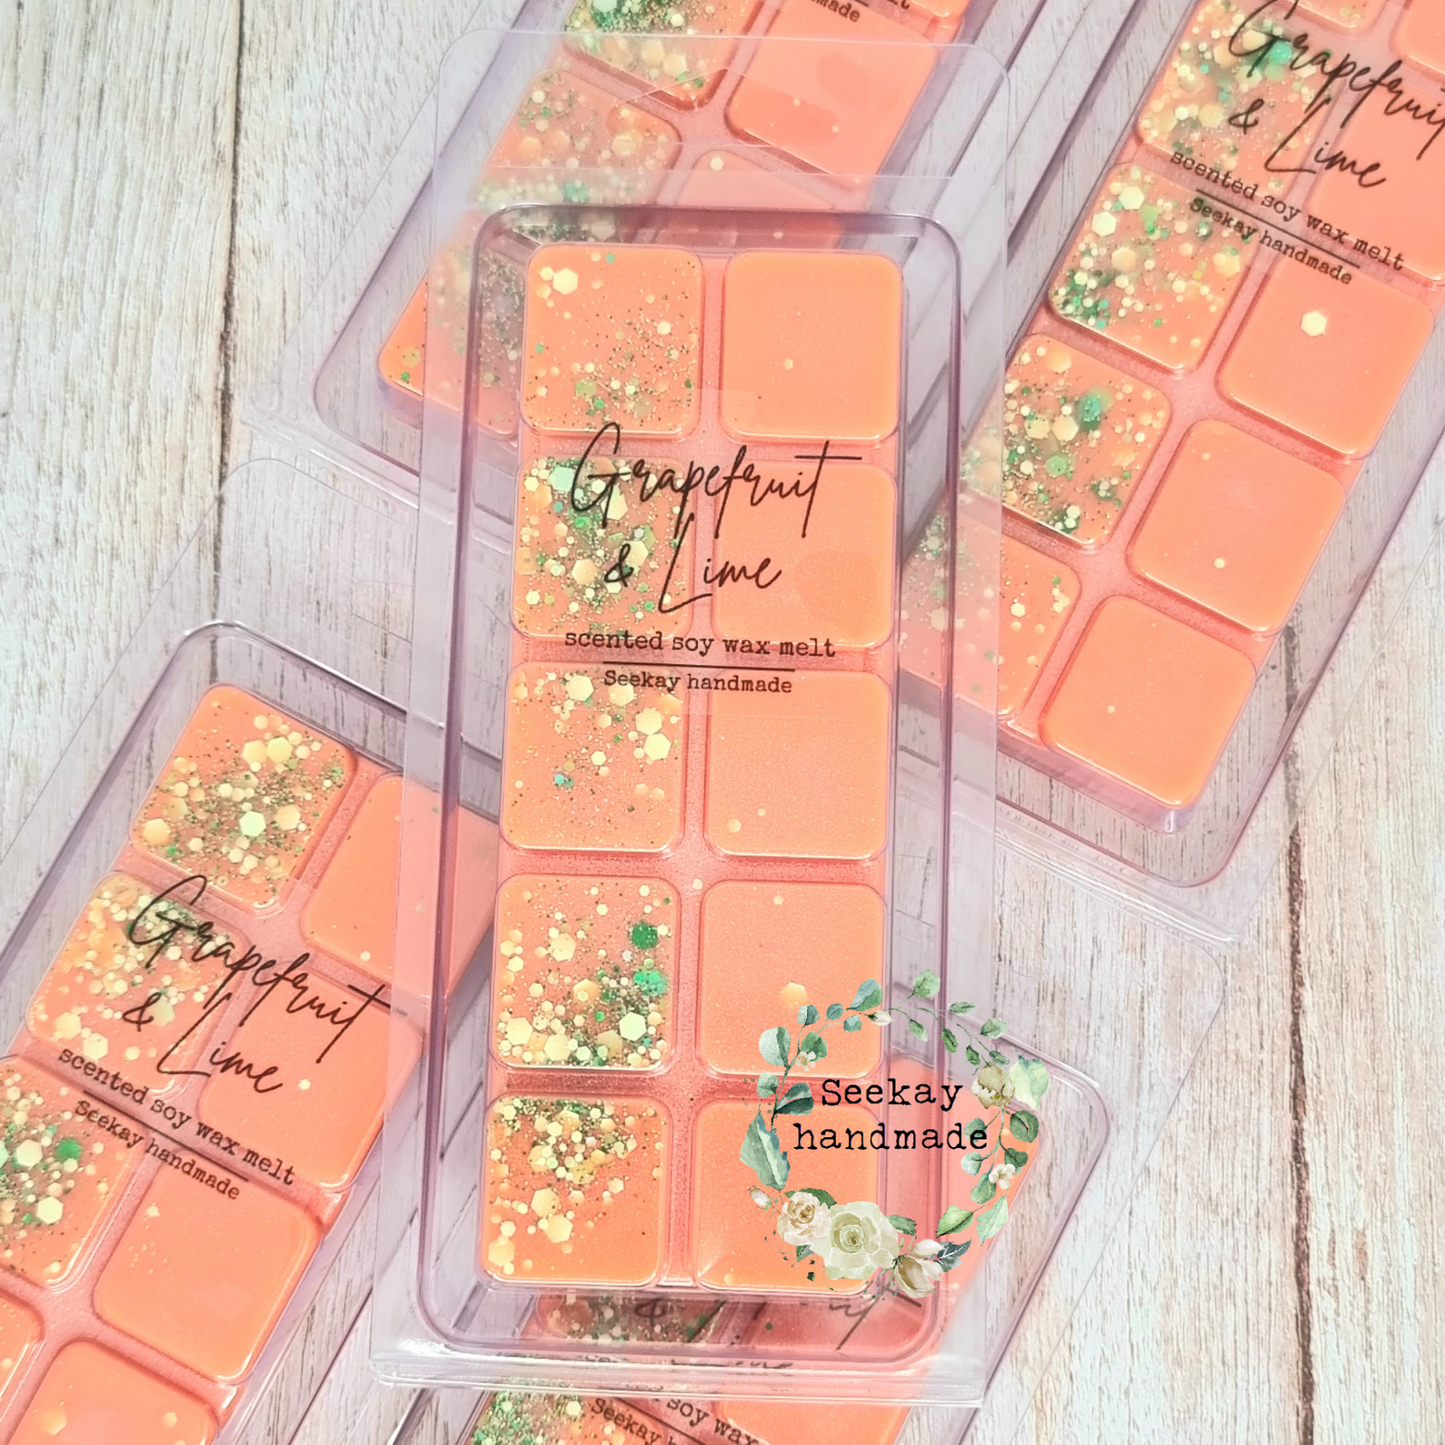 Grapefruit & Lime scented soy wax melt